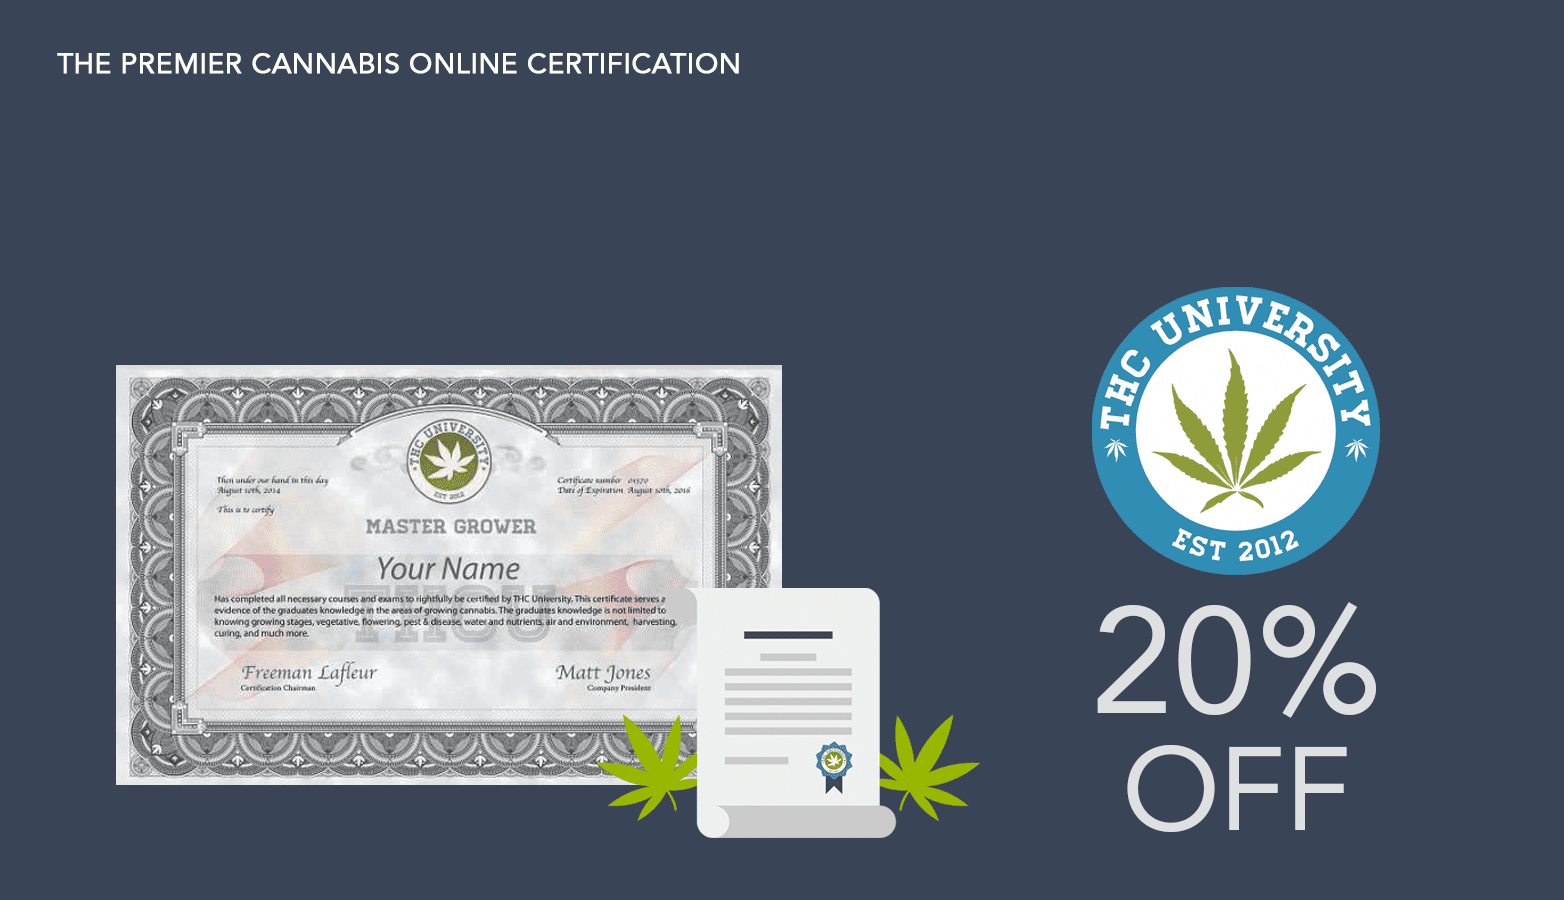 THC University Discount Code - 20% OFF - Save On Cannabis